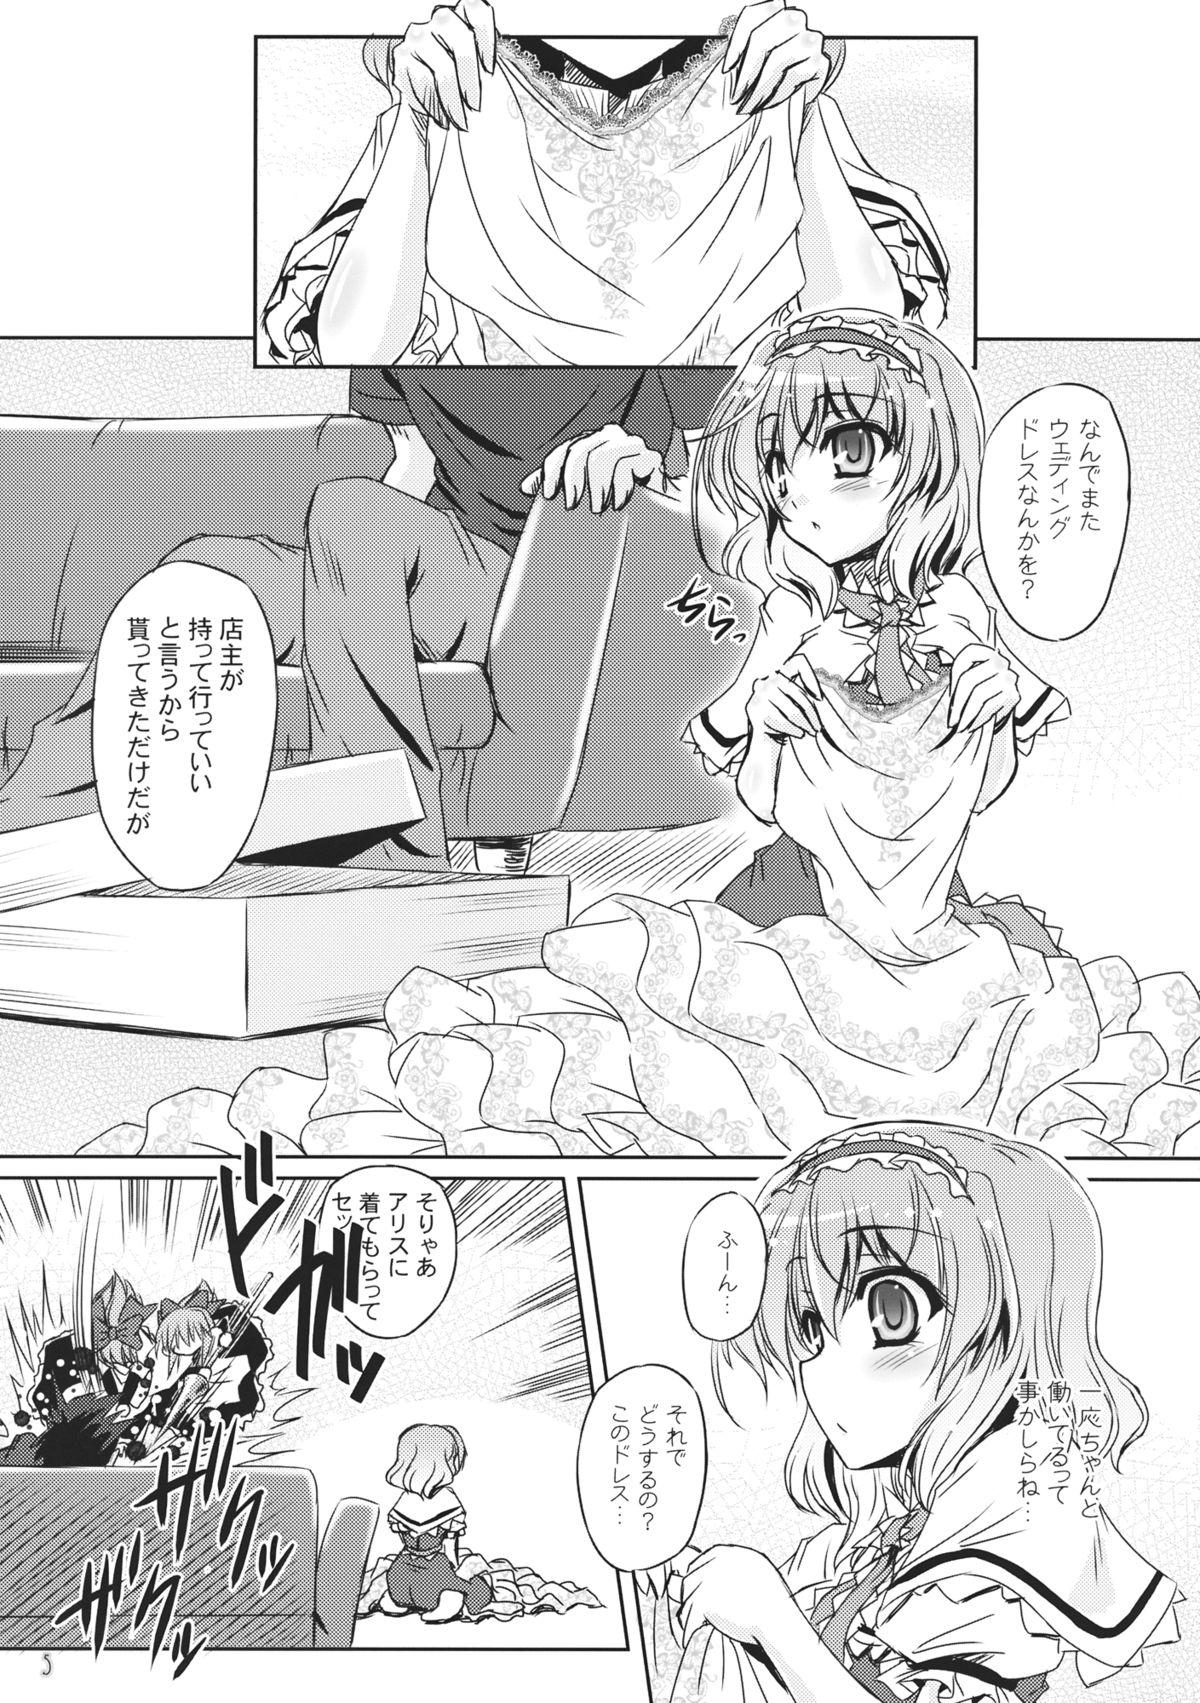 Czech Loose Strings 2 - Touhou project Pussy Eating - Page 4